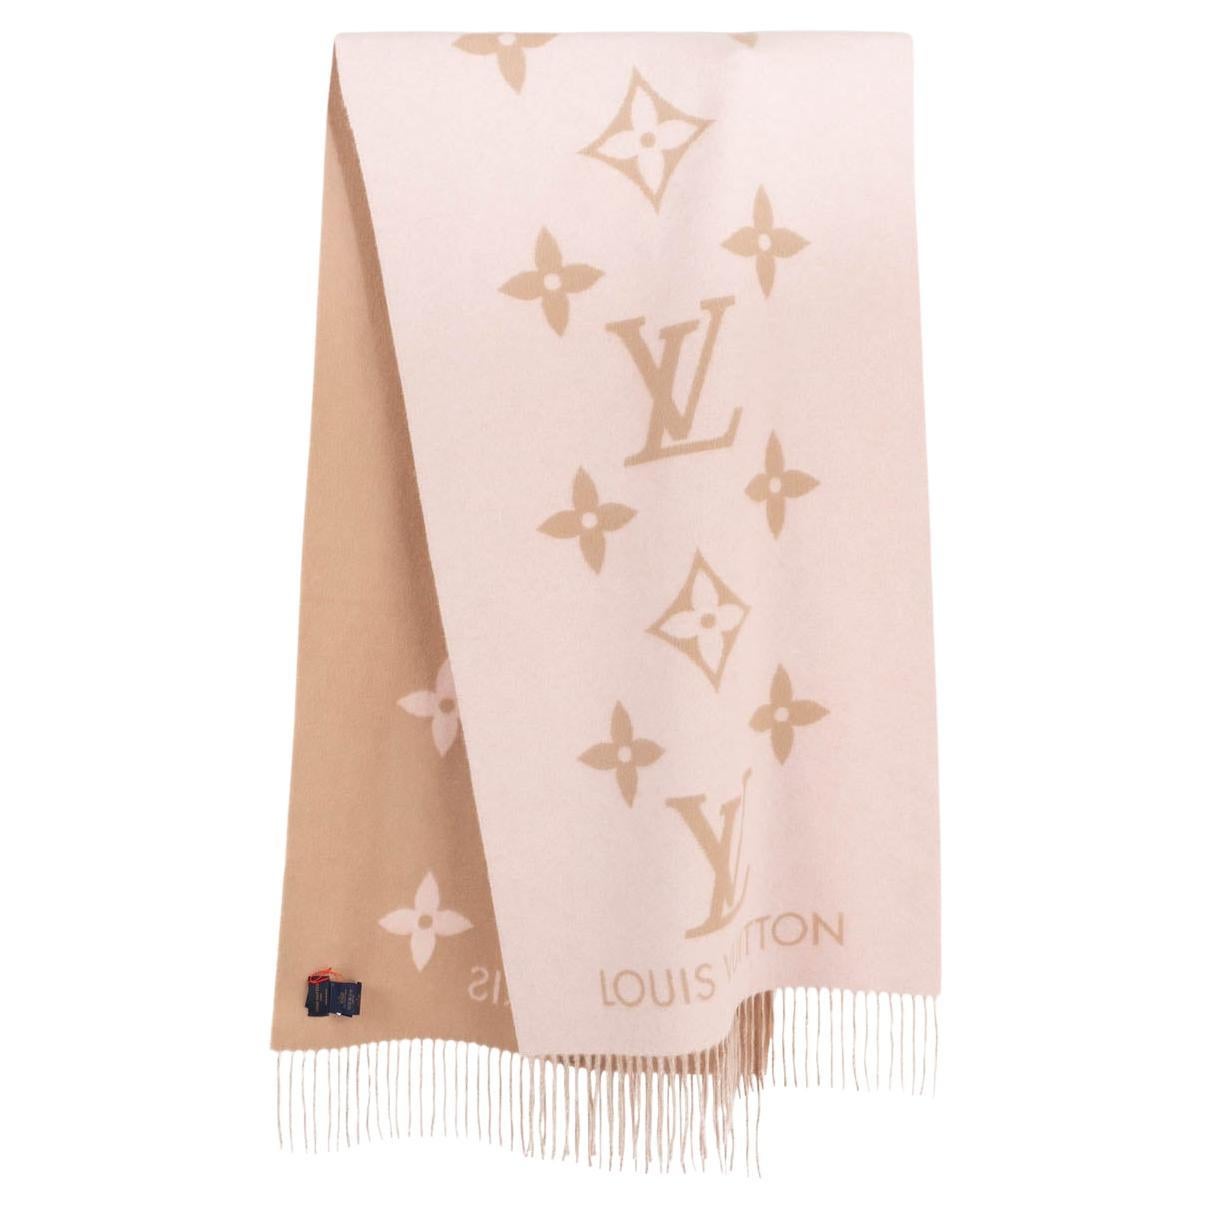 How can I tell if a Louis Vuitton scarf is authentic?